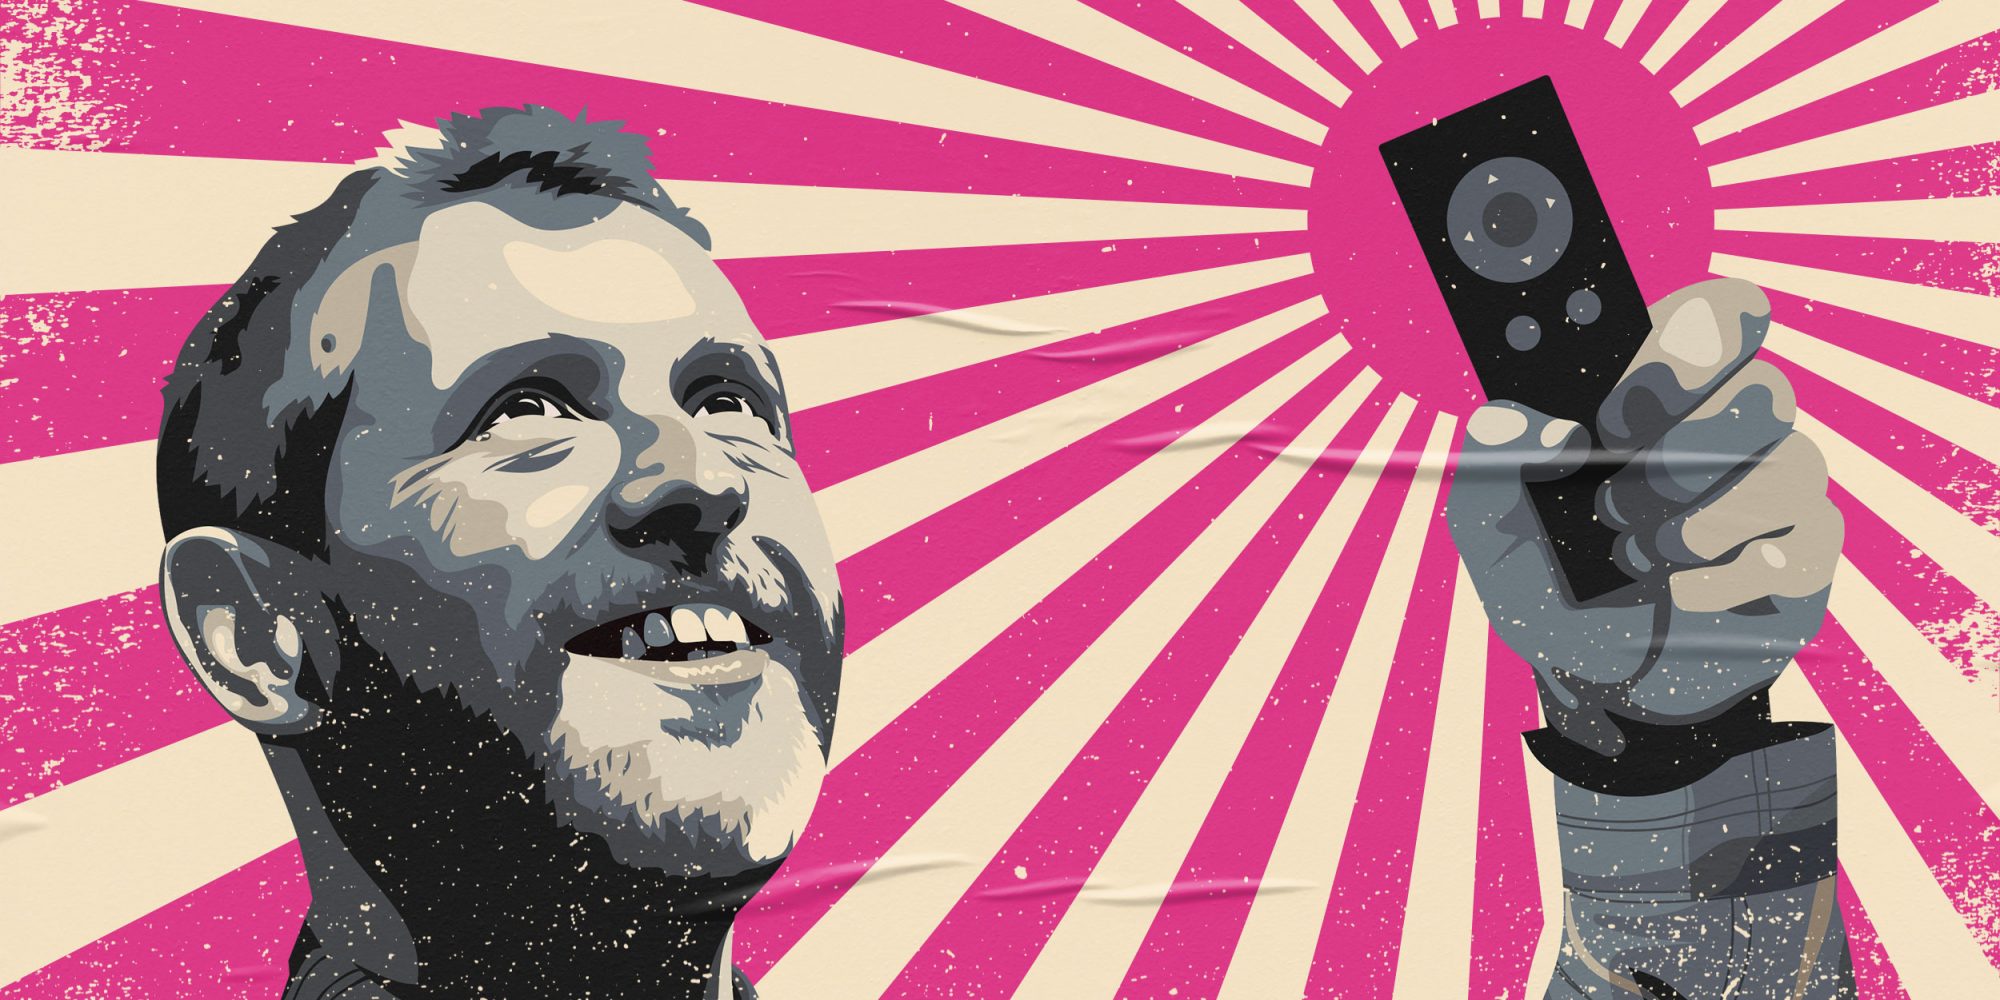 Dave Gorman: Powerpoint To The People